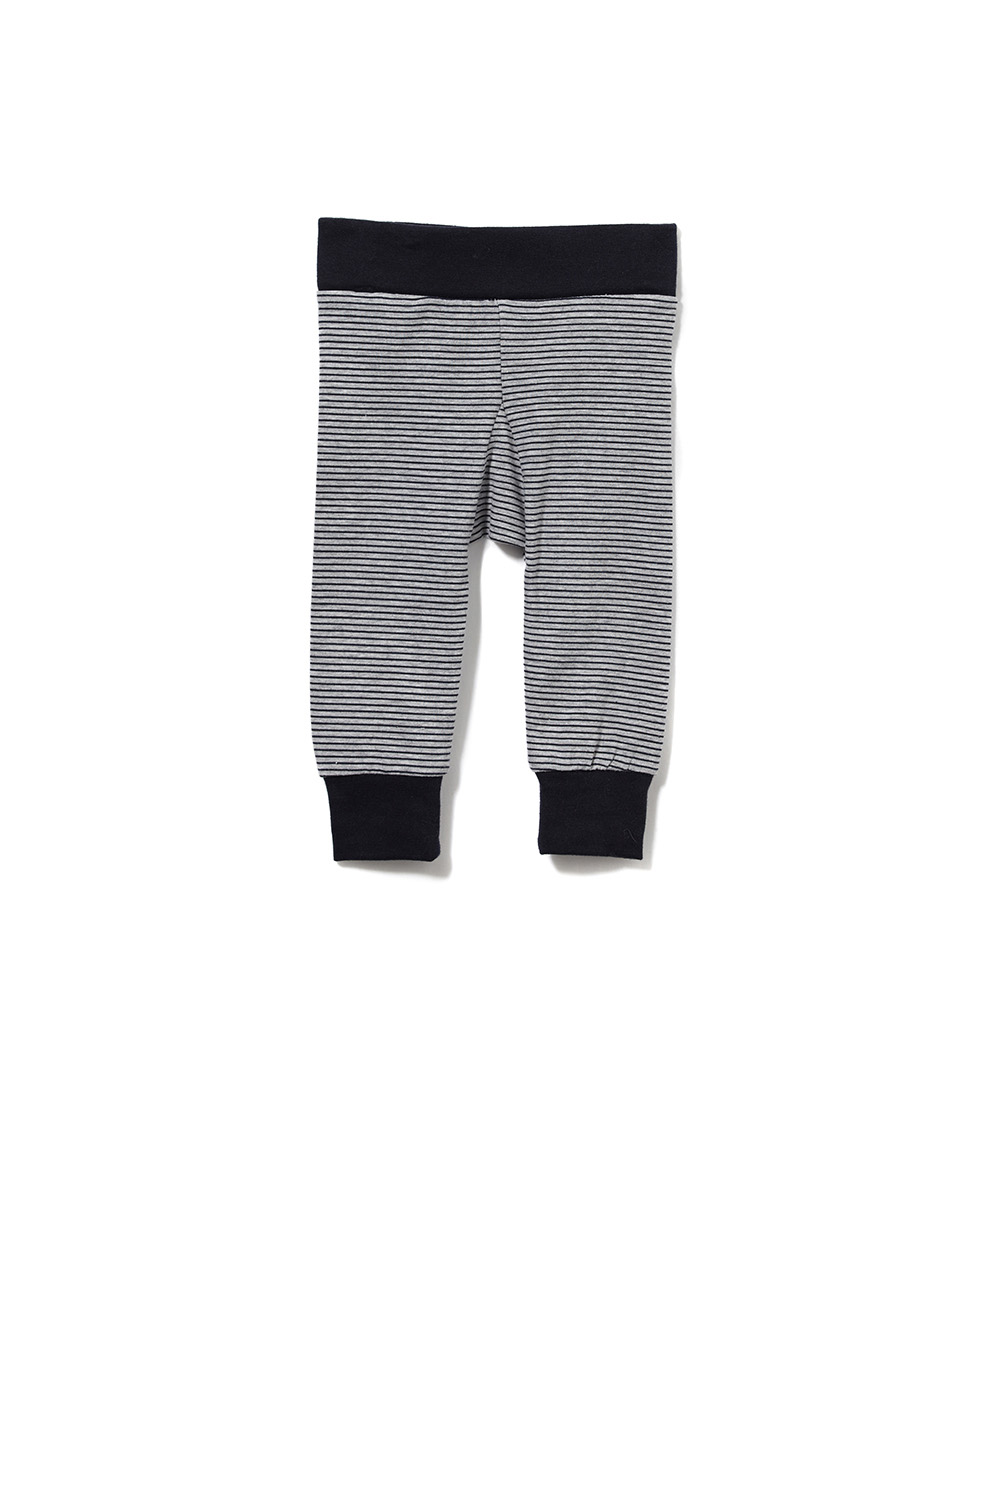 Milky Stripe Pant CLEARANCE